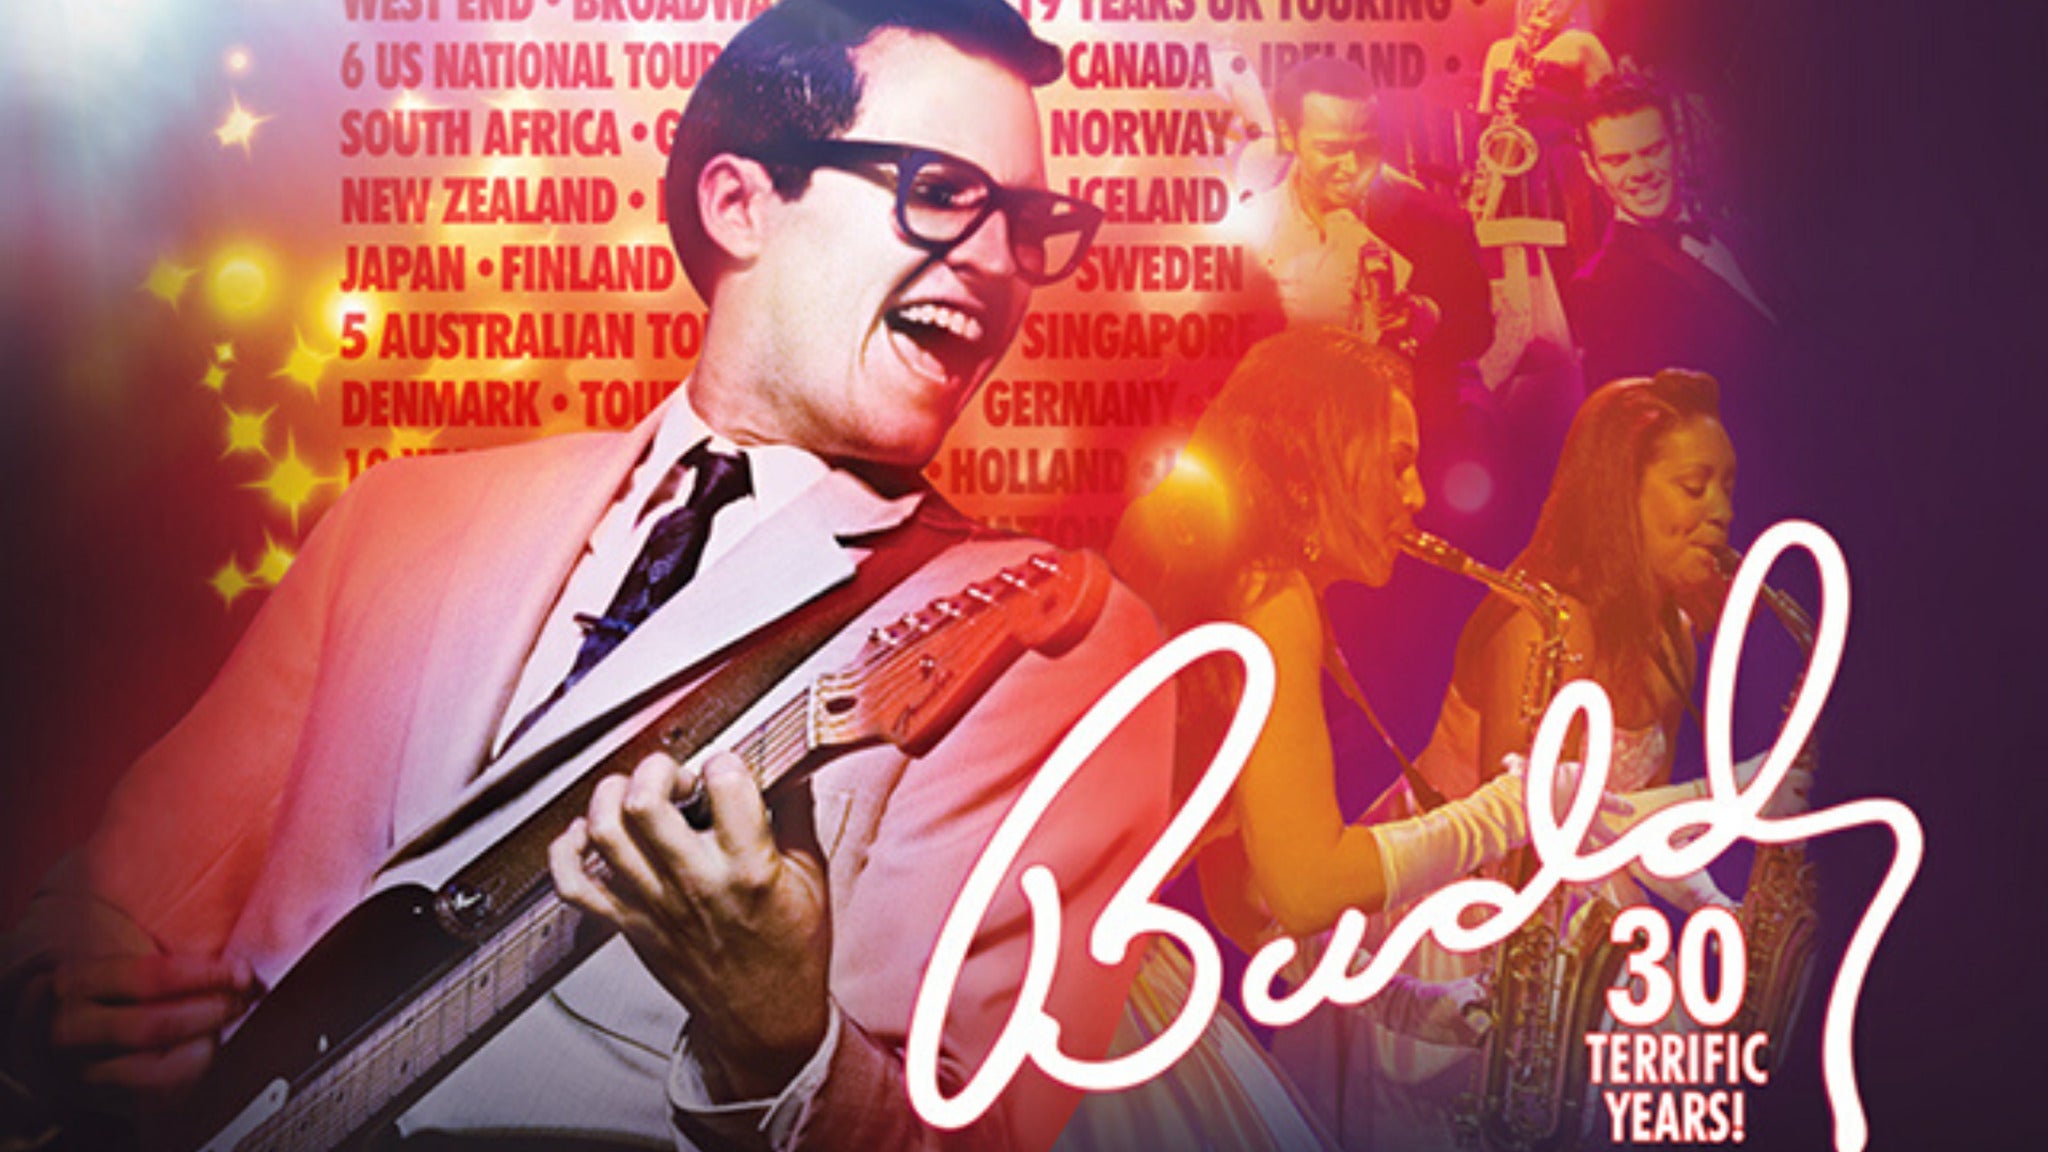 Buddy - The Buddy Holly Story Event Title Pic